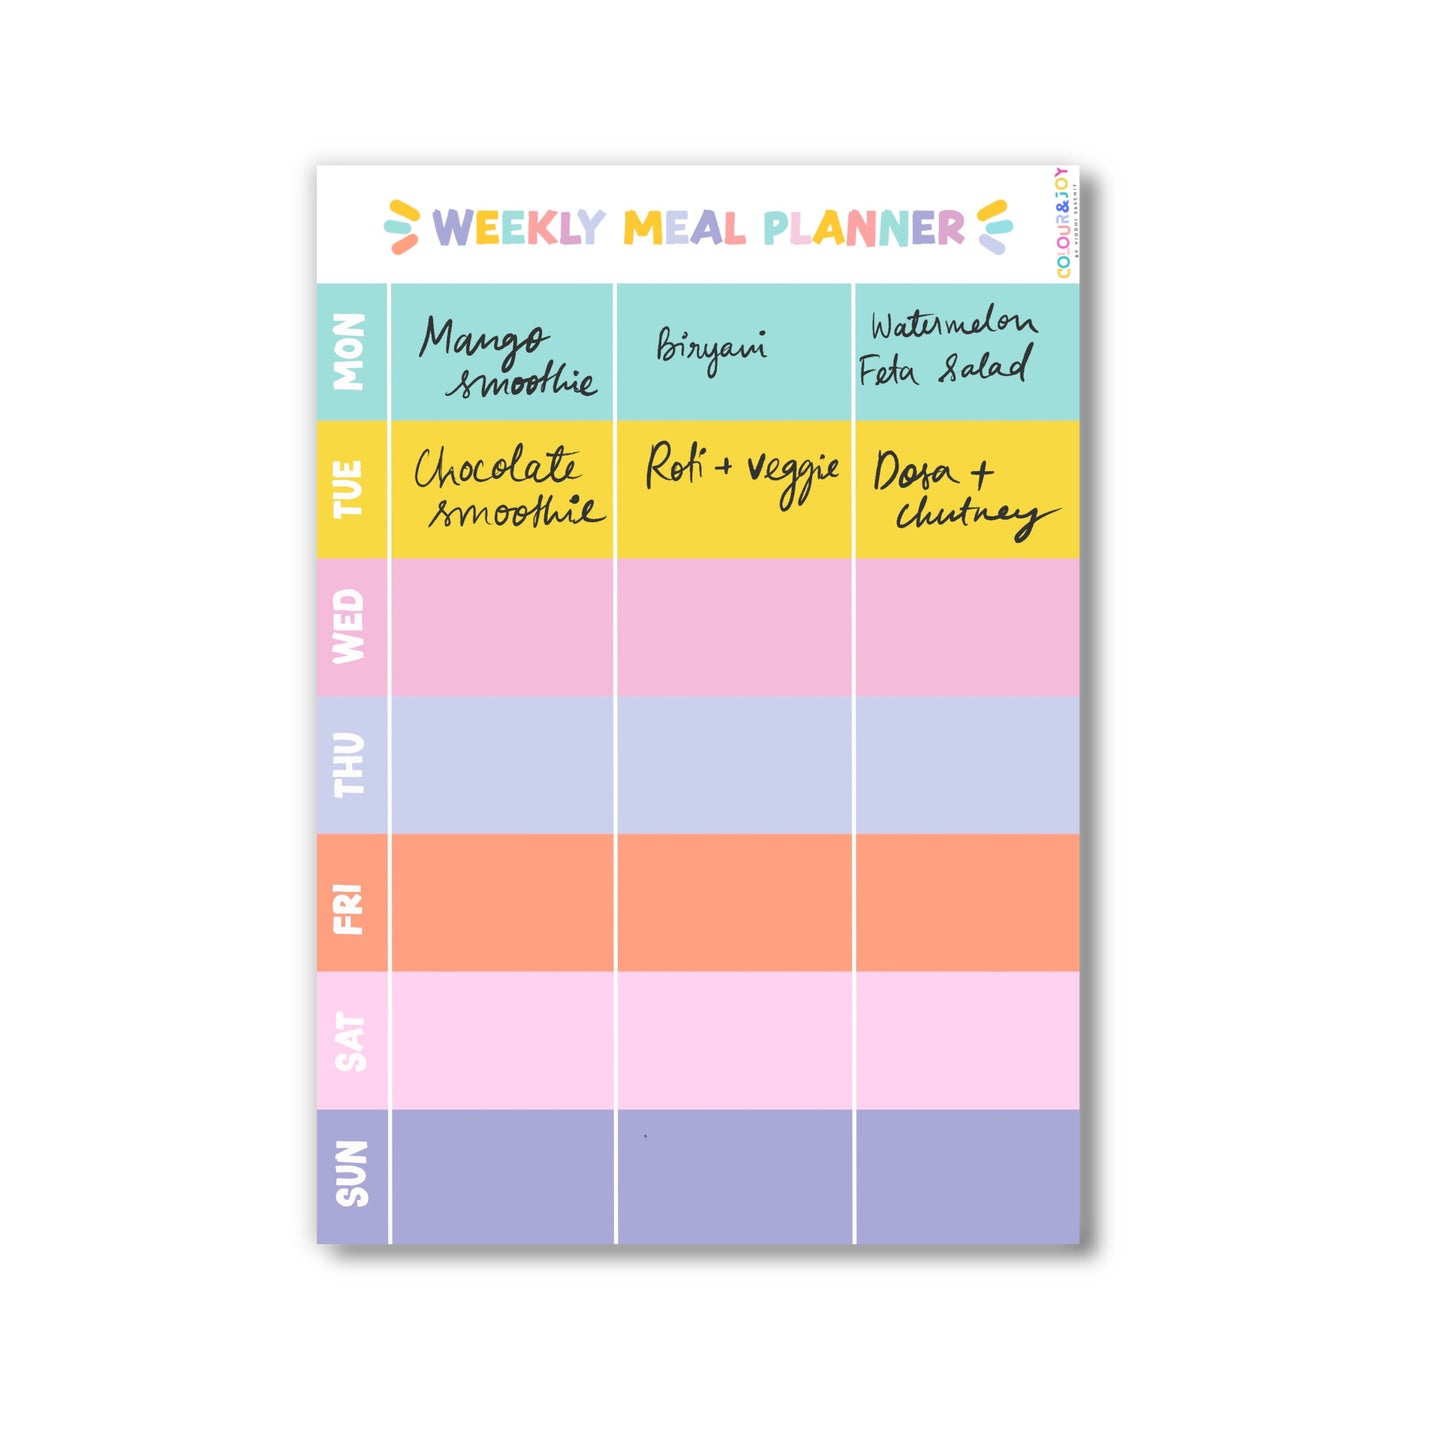 Weekly Meal Planner - A4 (8.3"x11.7")